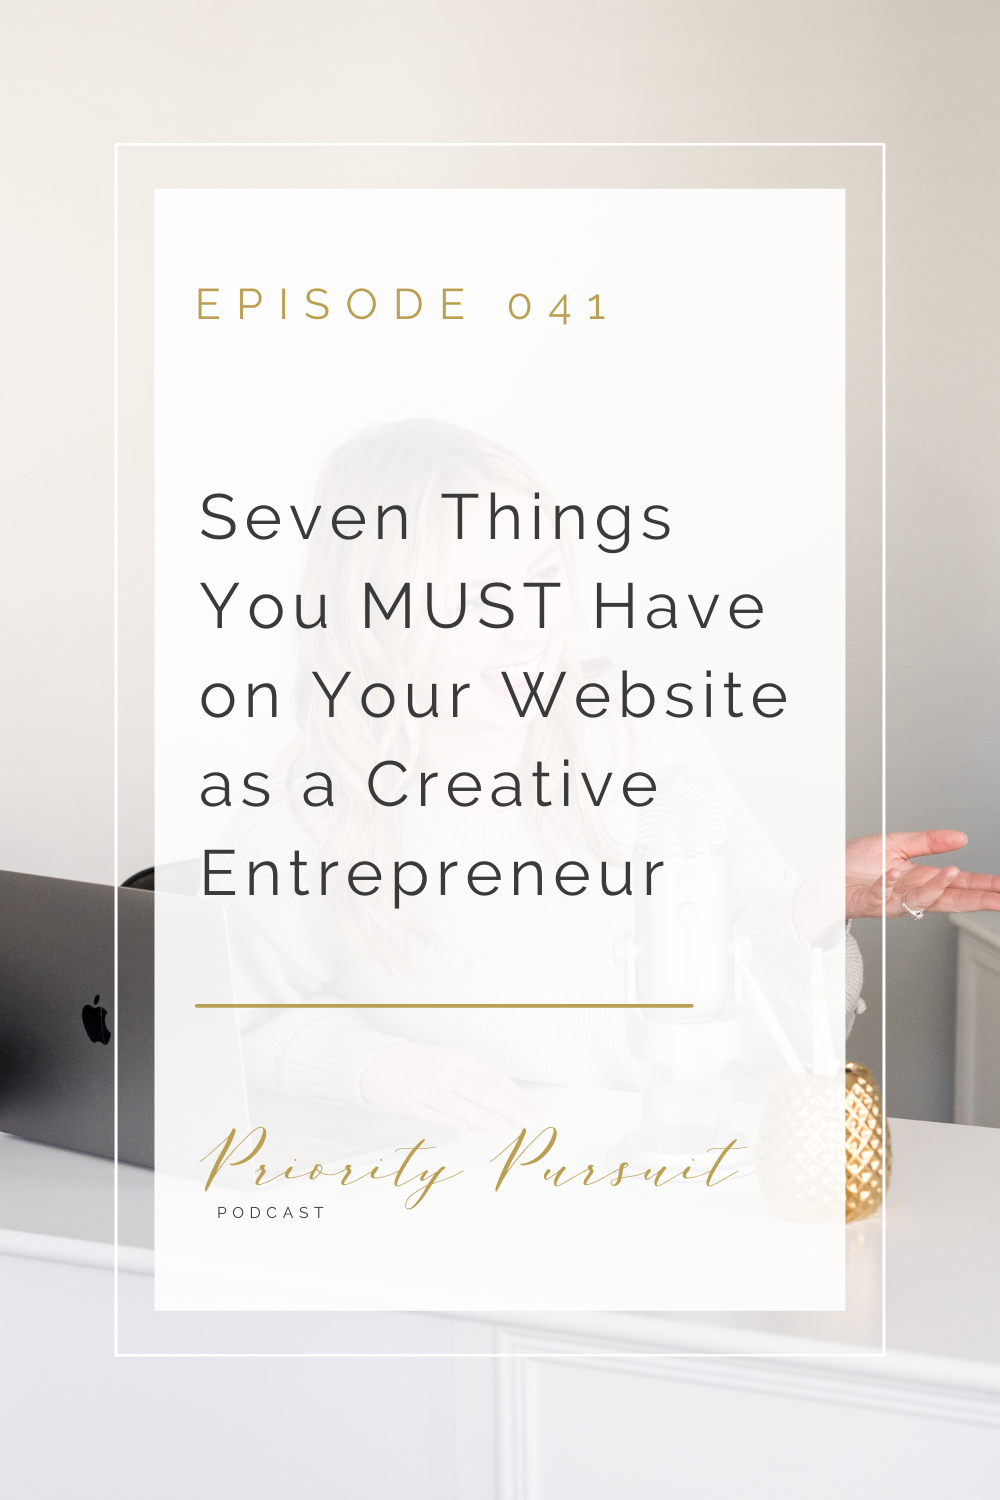 Victoria Rayburn shares seven things you must have on your website as a creative entrepreneur to convert website visitors into paying customers this episode of “Priority Pursuit.”